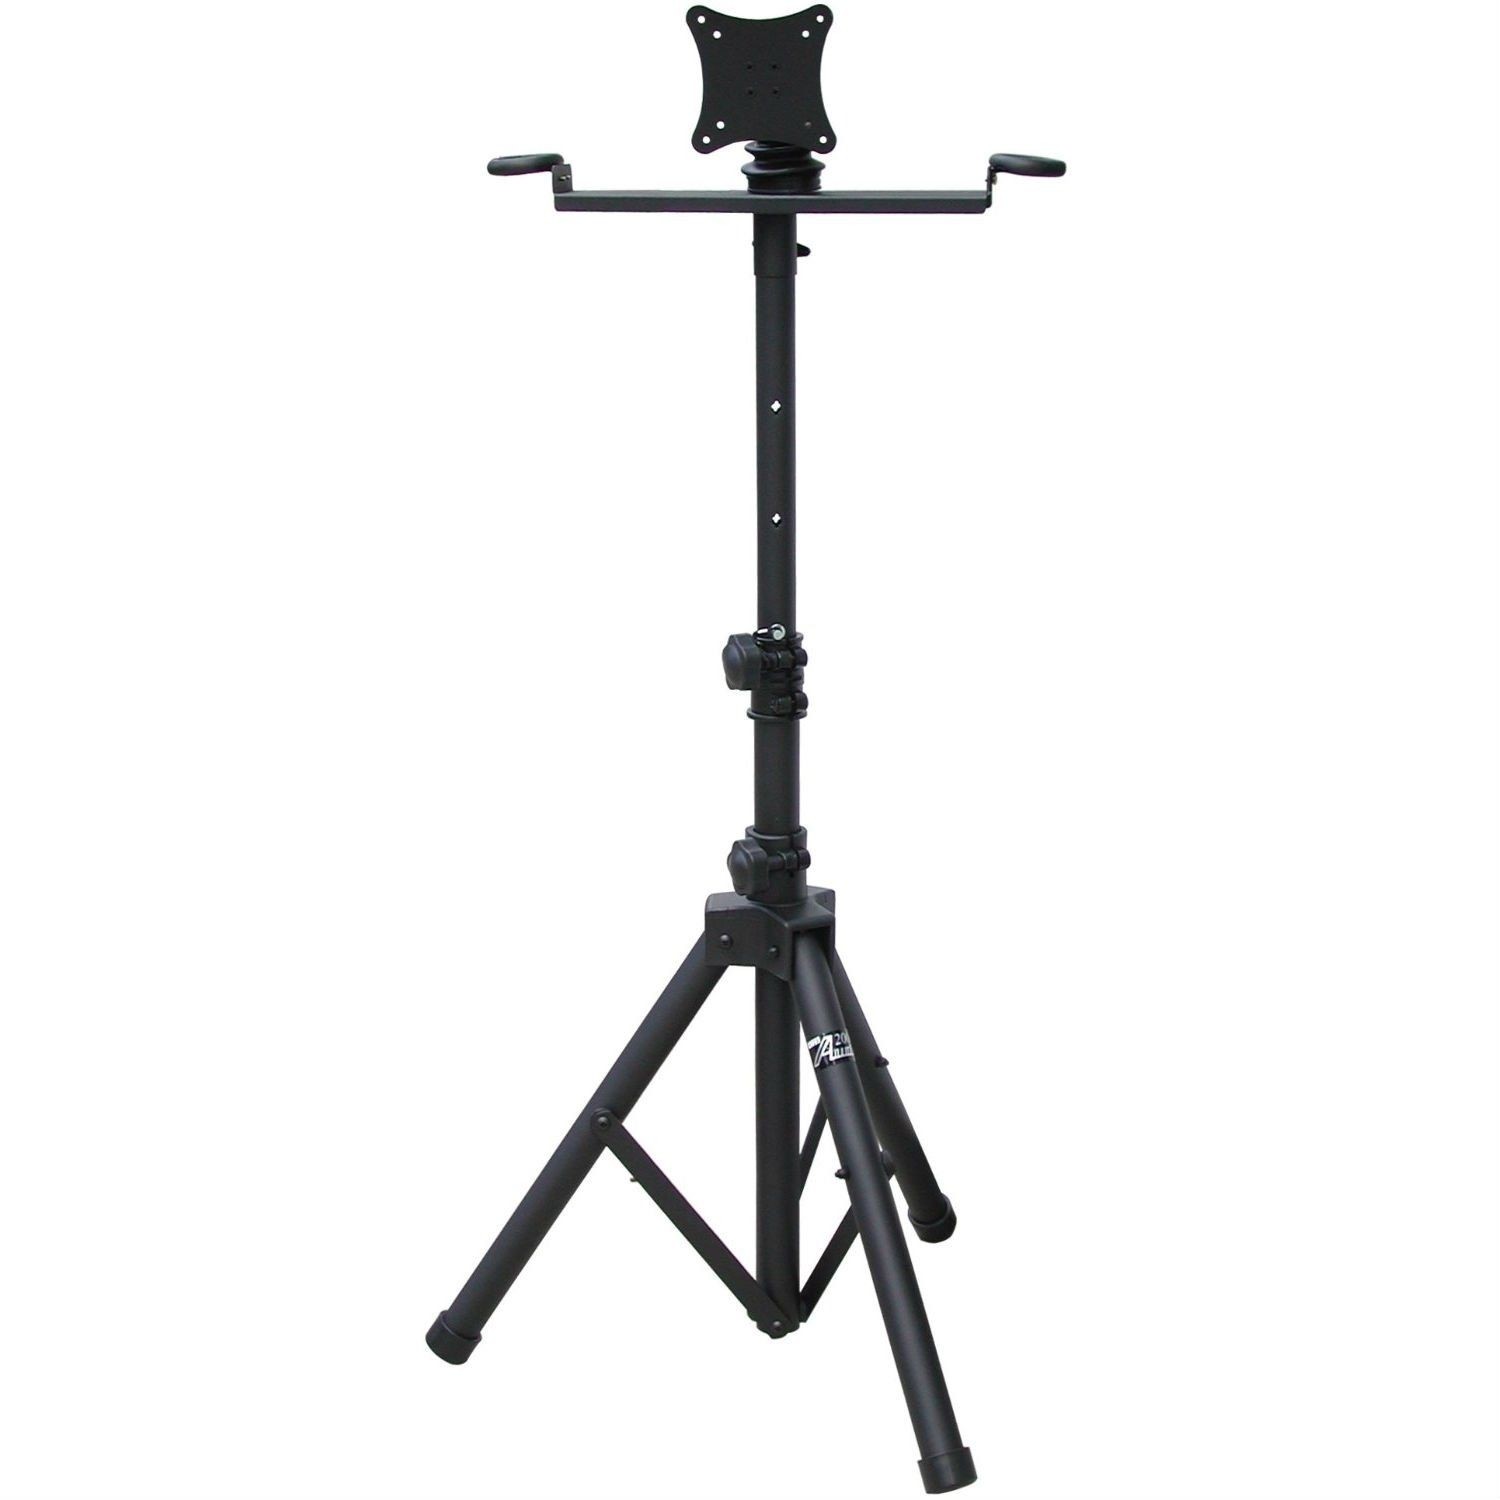 Audio2000'S AST420Y Portable Flat Panel TV/Monitor Stand with Foldable Tripod Legs